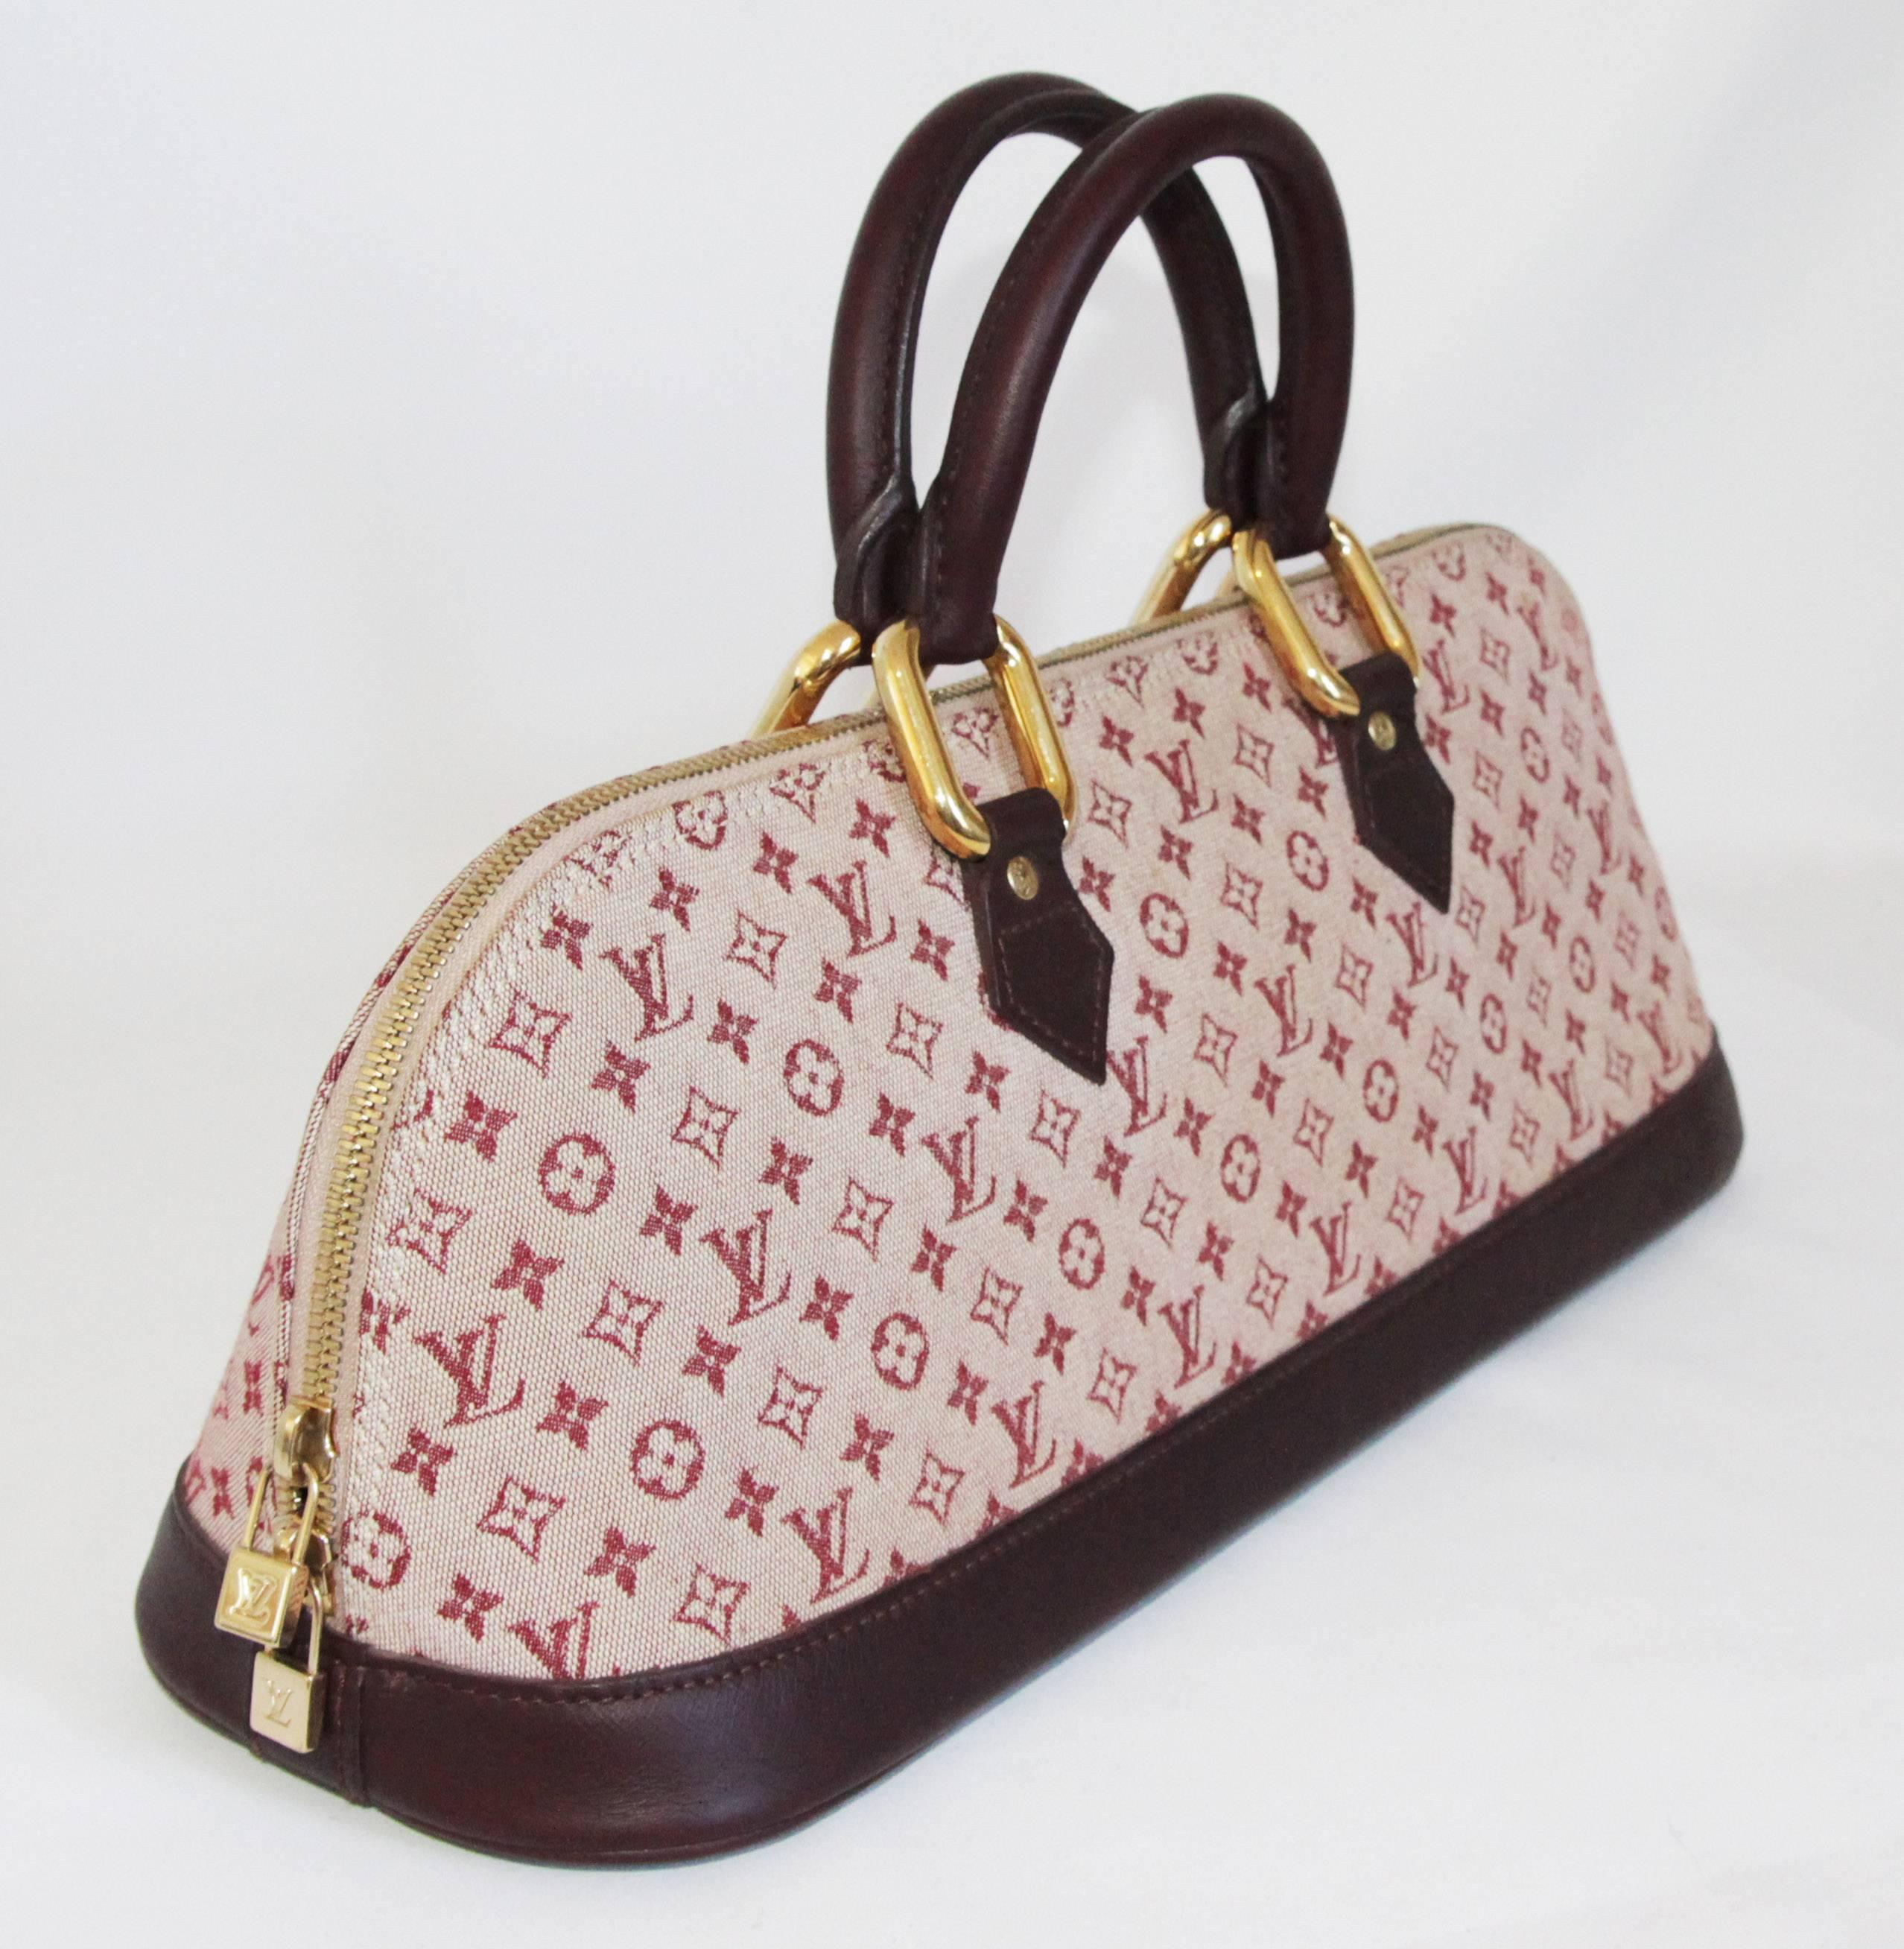 Gorgeous Louis Vuitton mini Alma long special edition handbag. Made of monogram fabric and burgundy leather. 

Created in 1992, the Original Alma model has been, for more than 20 years, one of Louis Vuitton’s most emblematic bags, on first-name